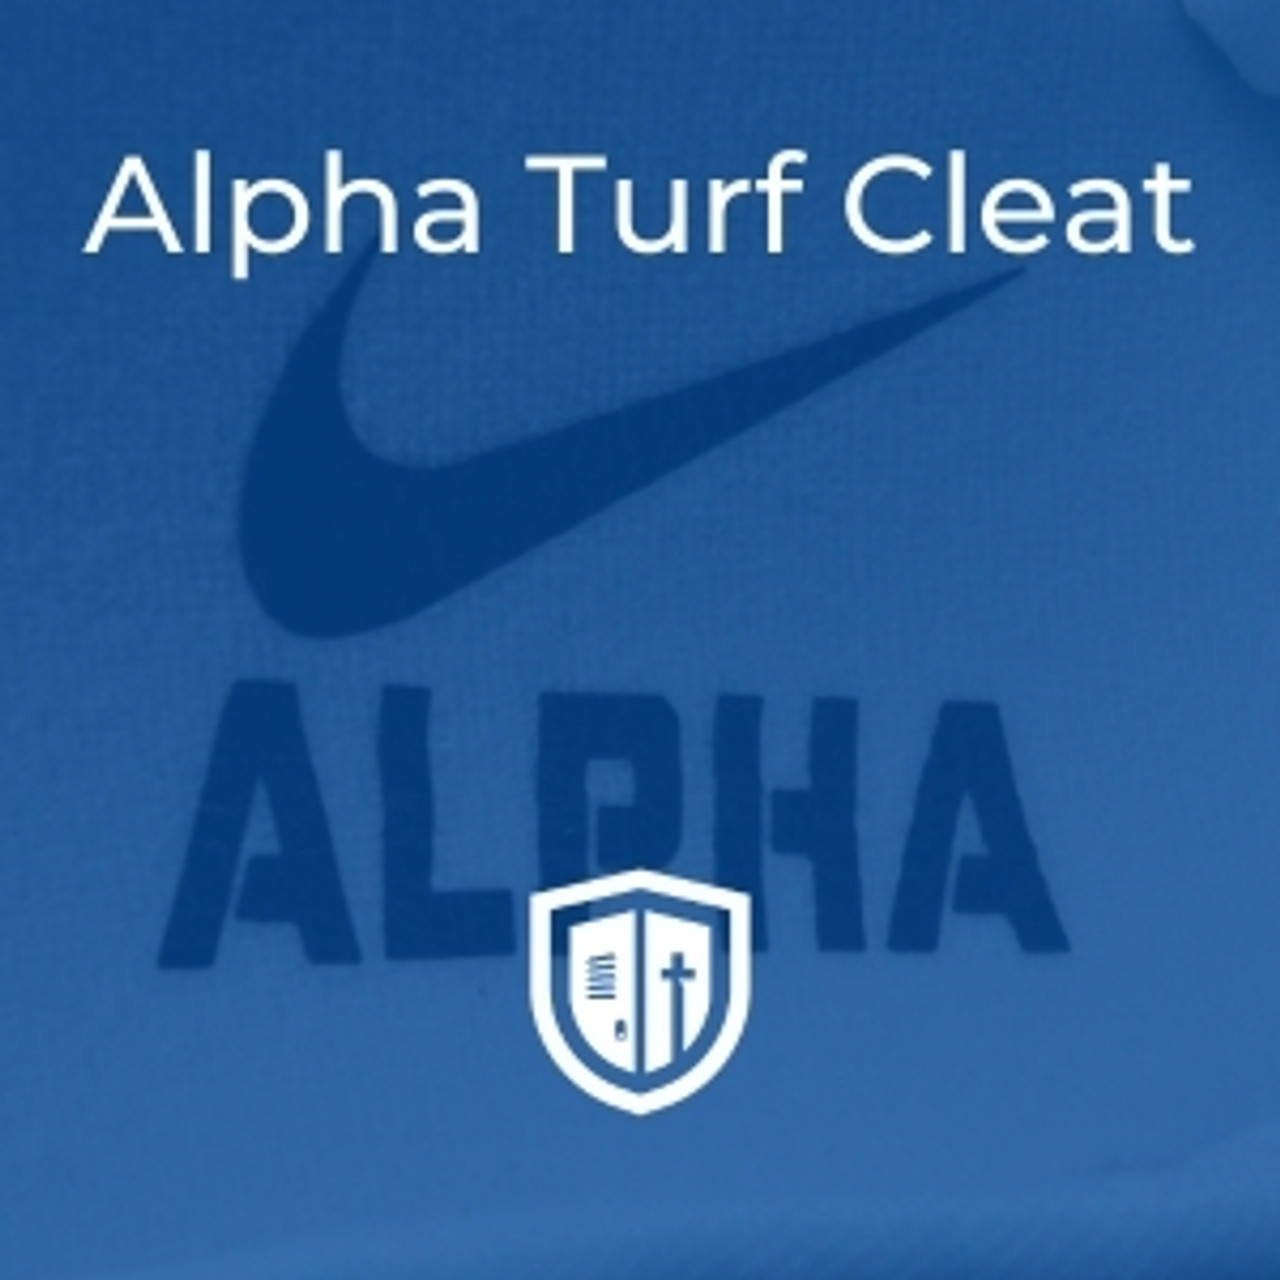 Turf Cleat